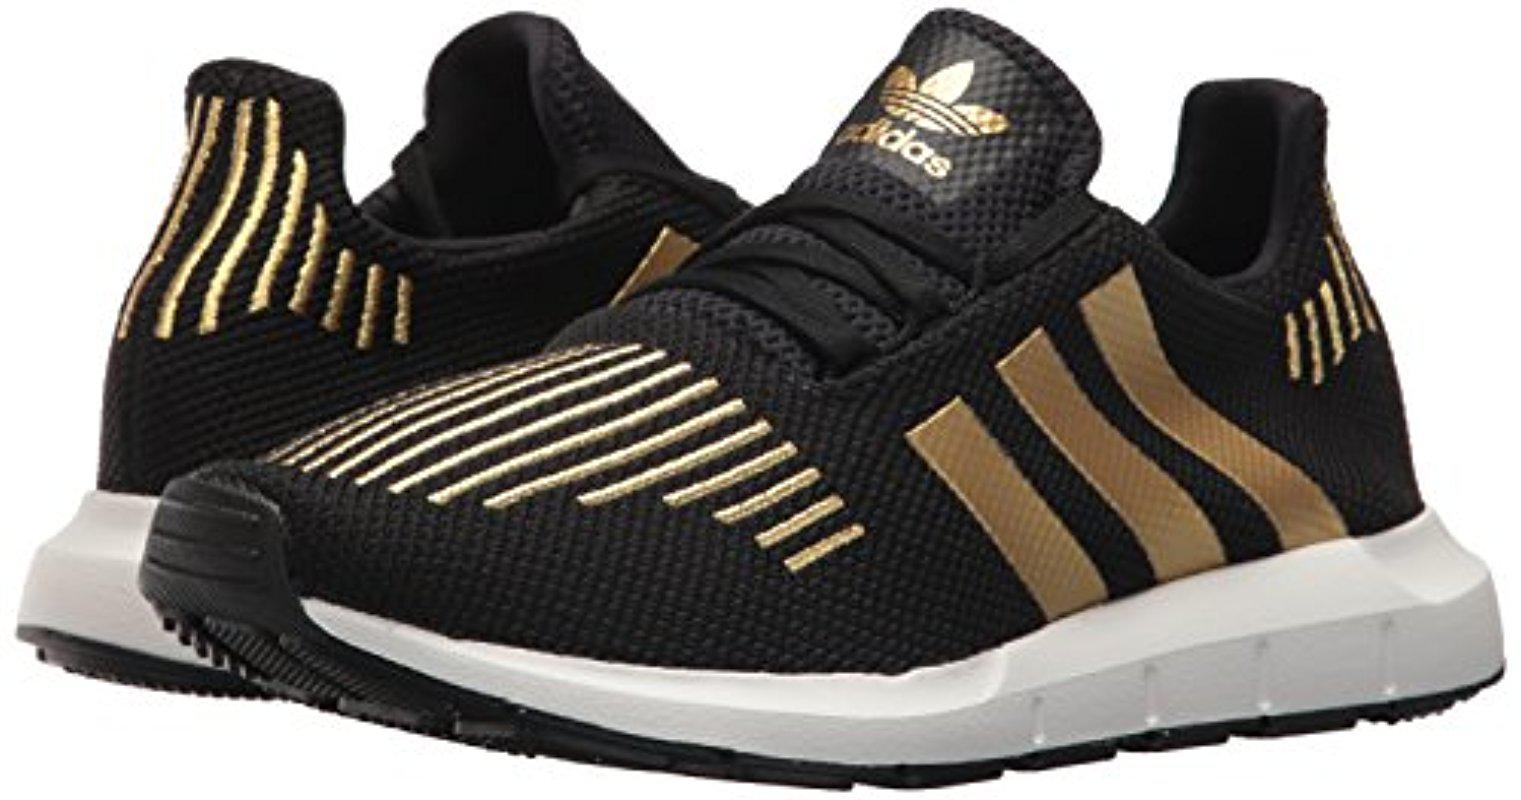 Women's Black and Gold Adidas Shoes for Women